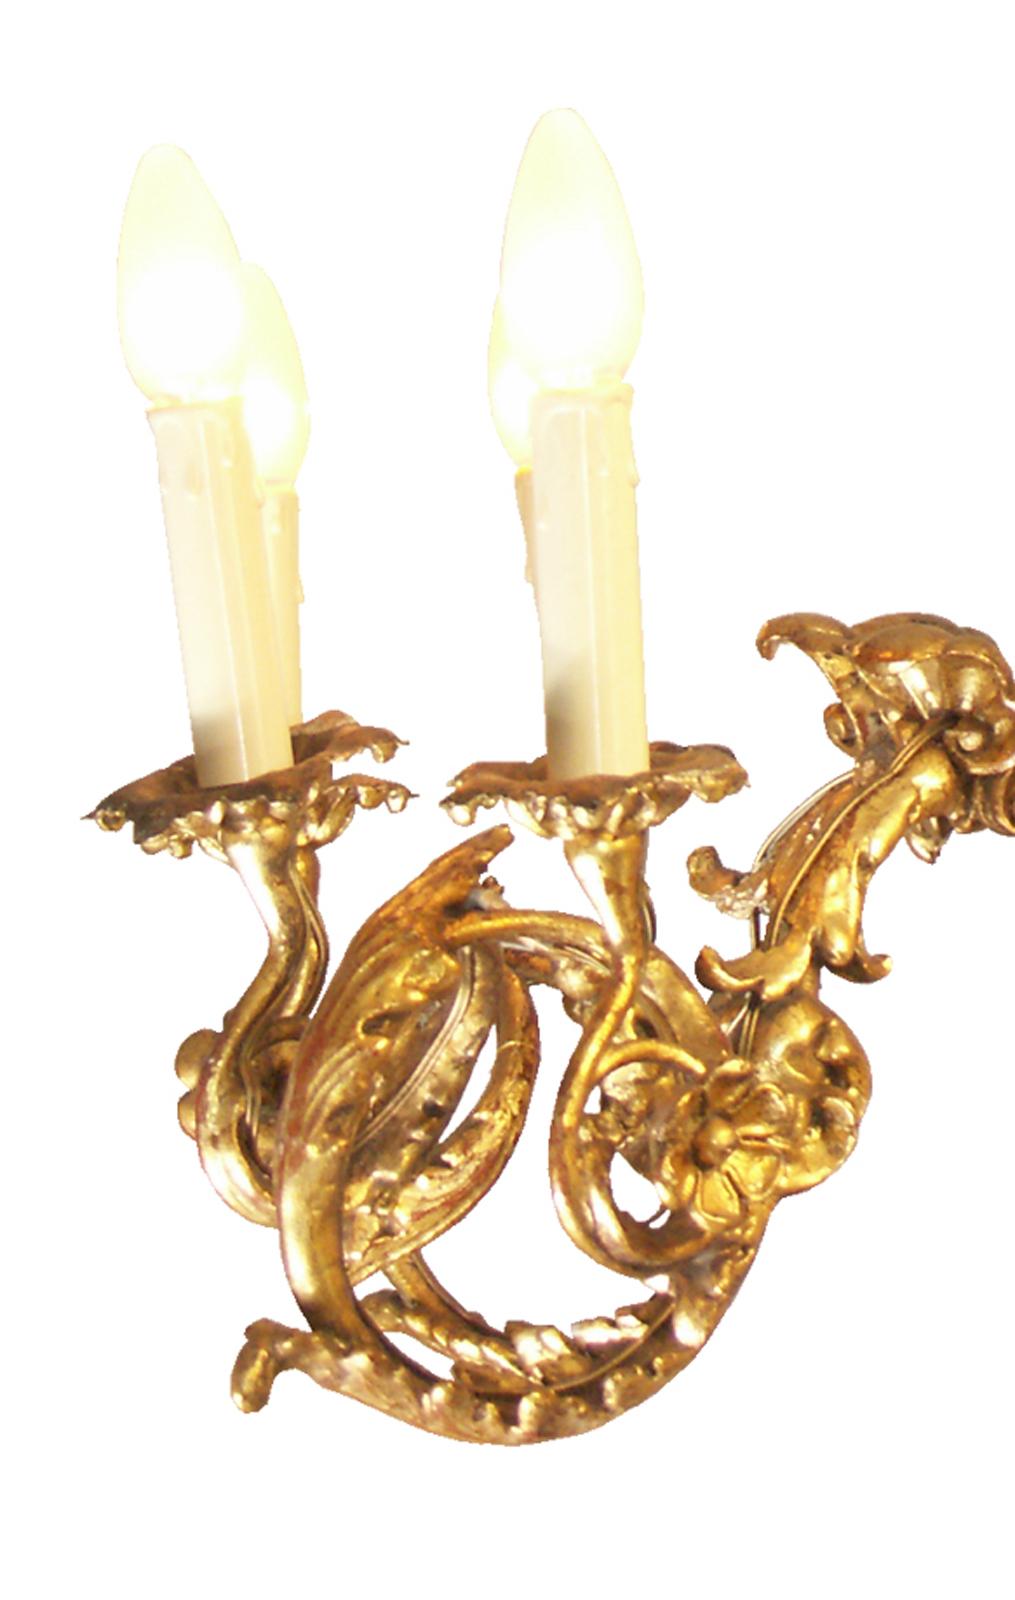 20th Century Wooden Carved/Gilded Baroque Chandelier, 1920s Original of the Time, Restored For Sale